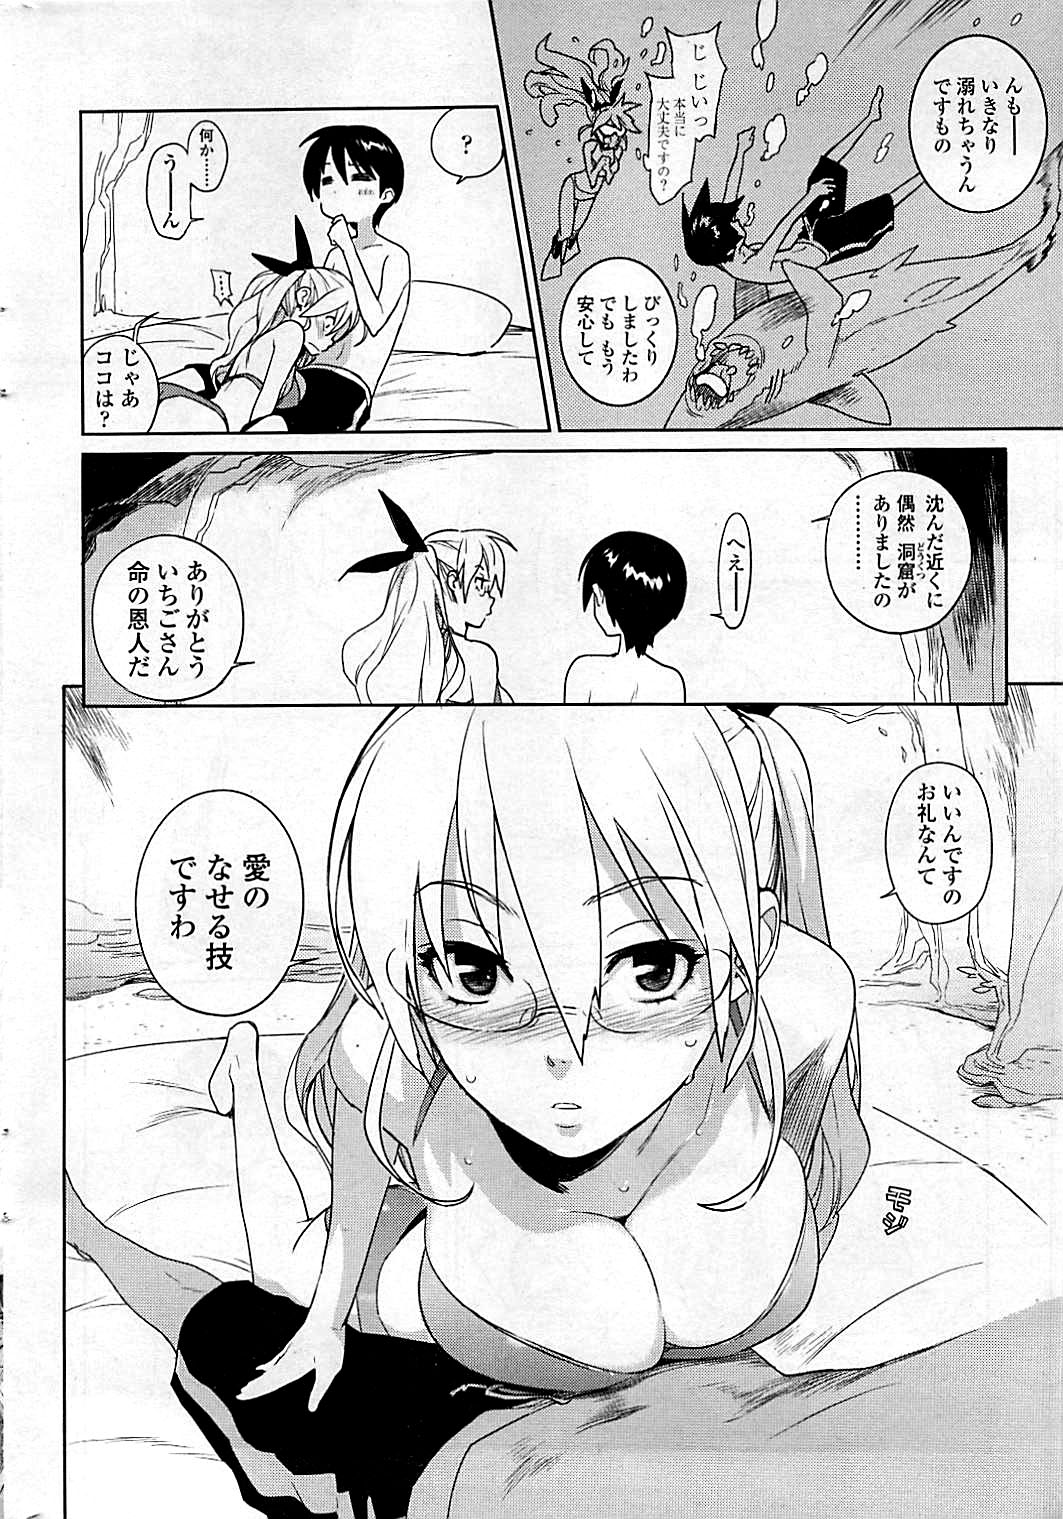 COMIC Sigma 2009-03 Extra Vol.29 page 36 full